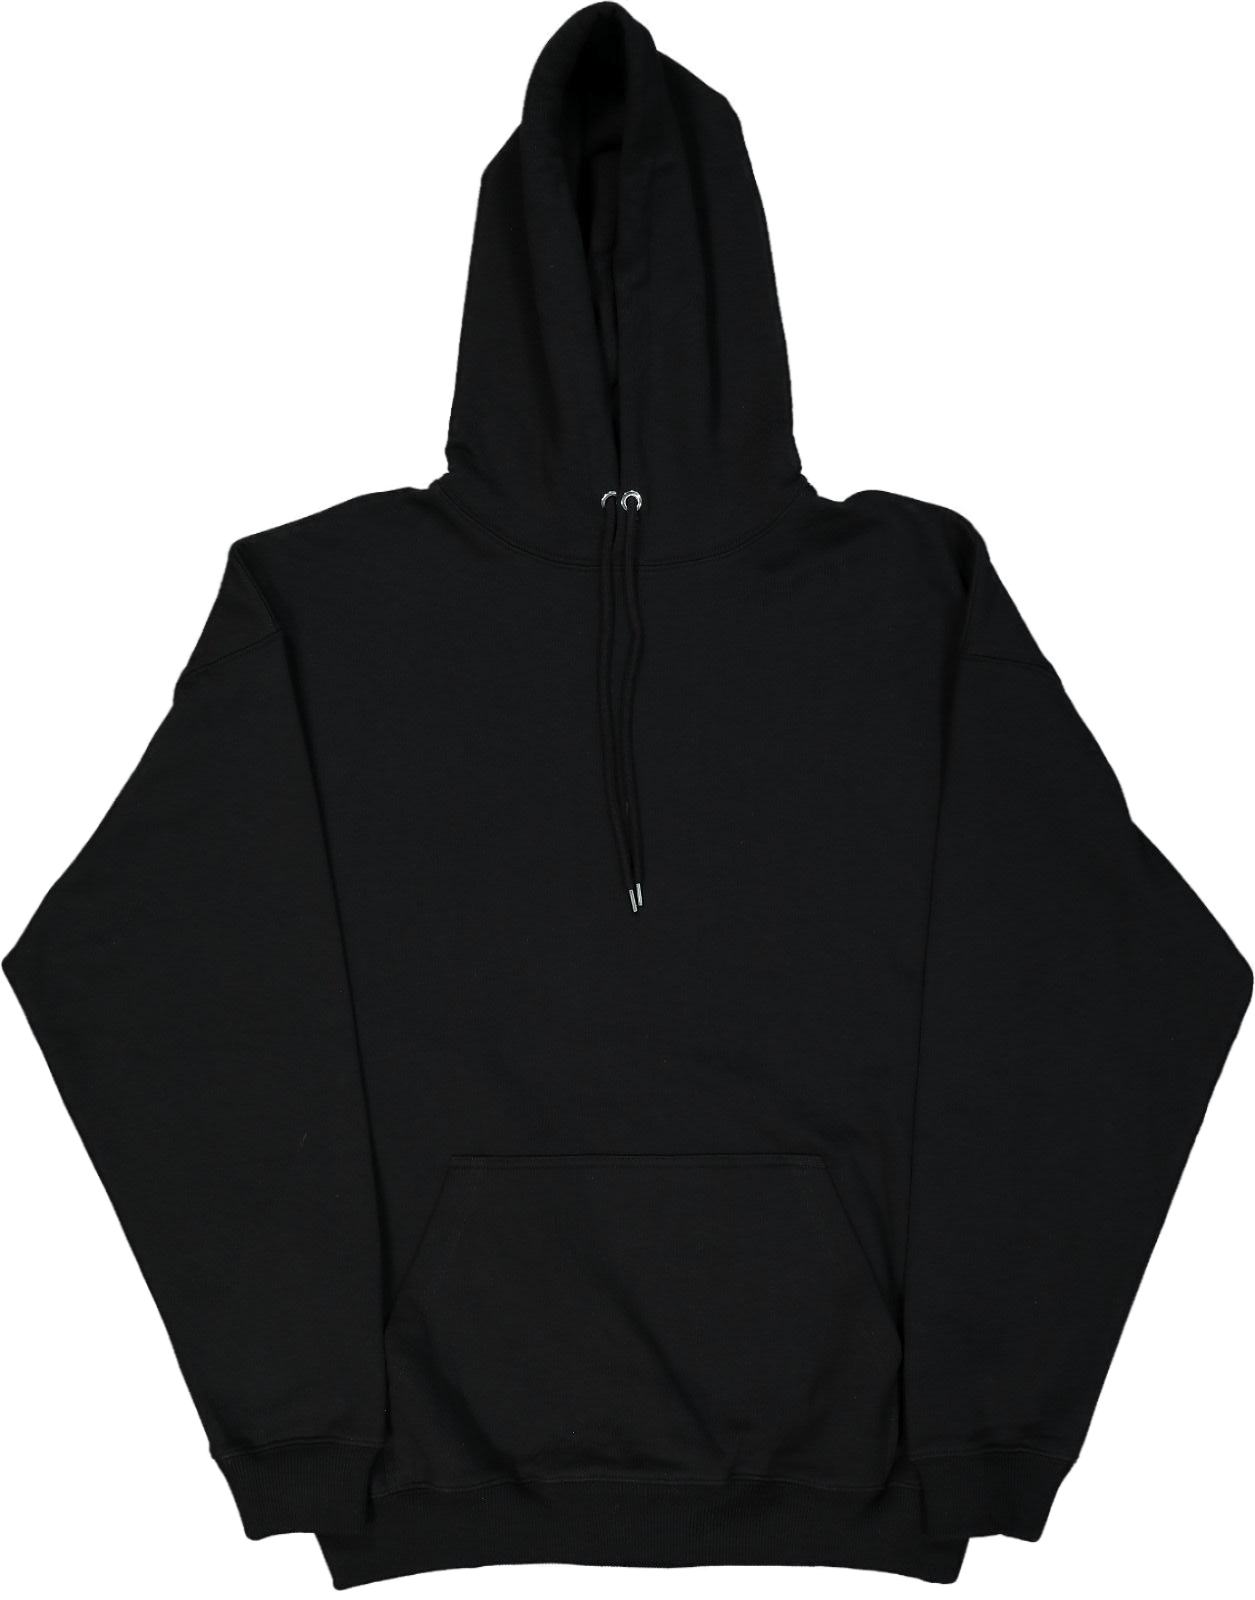 ACT6 "Welcome" Hoodie